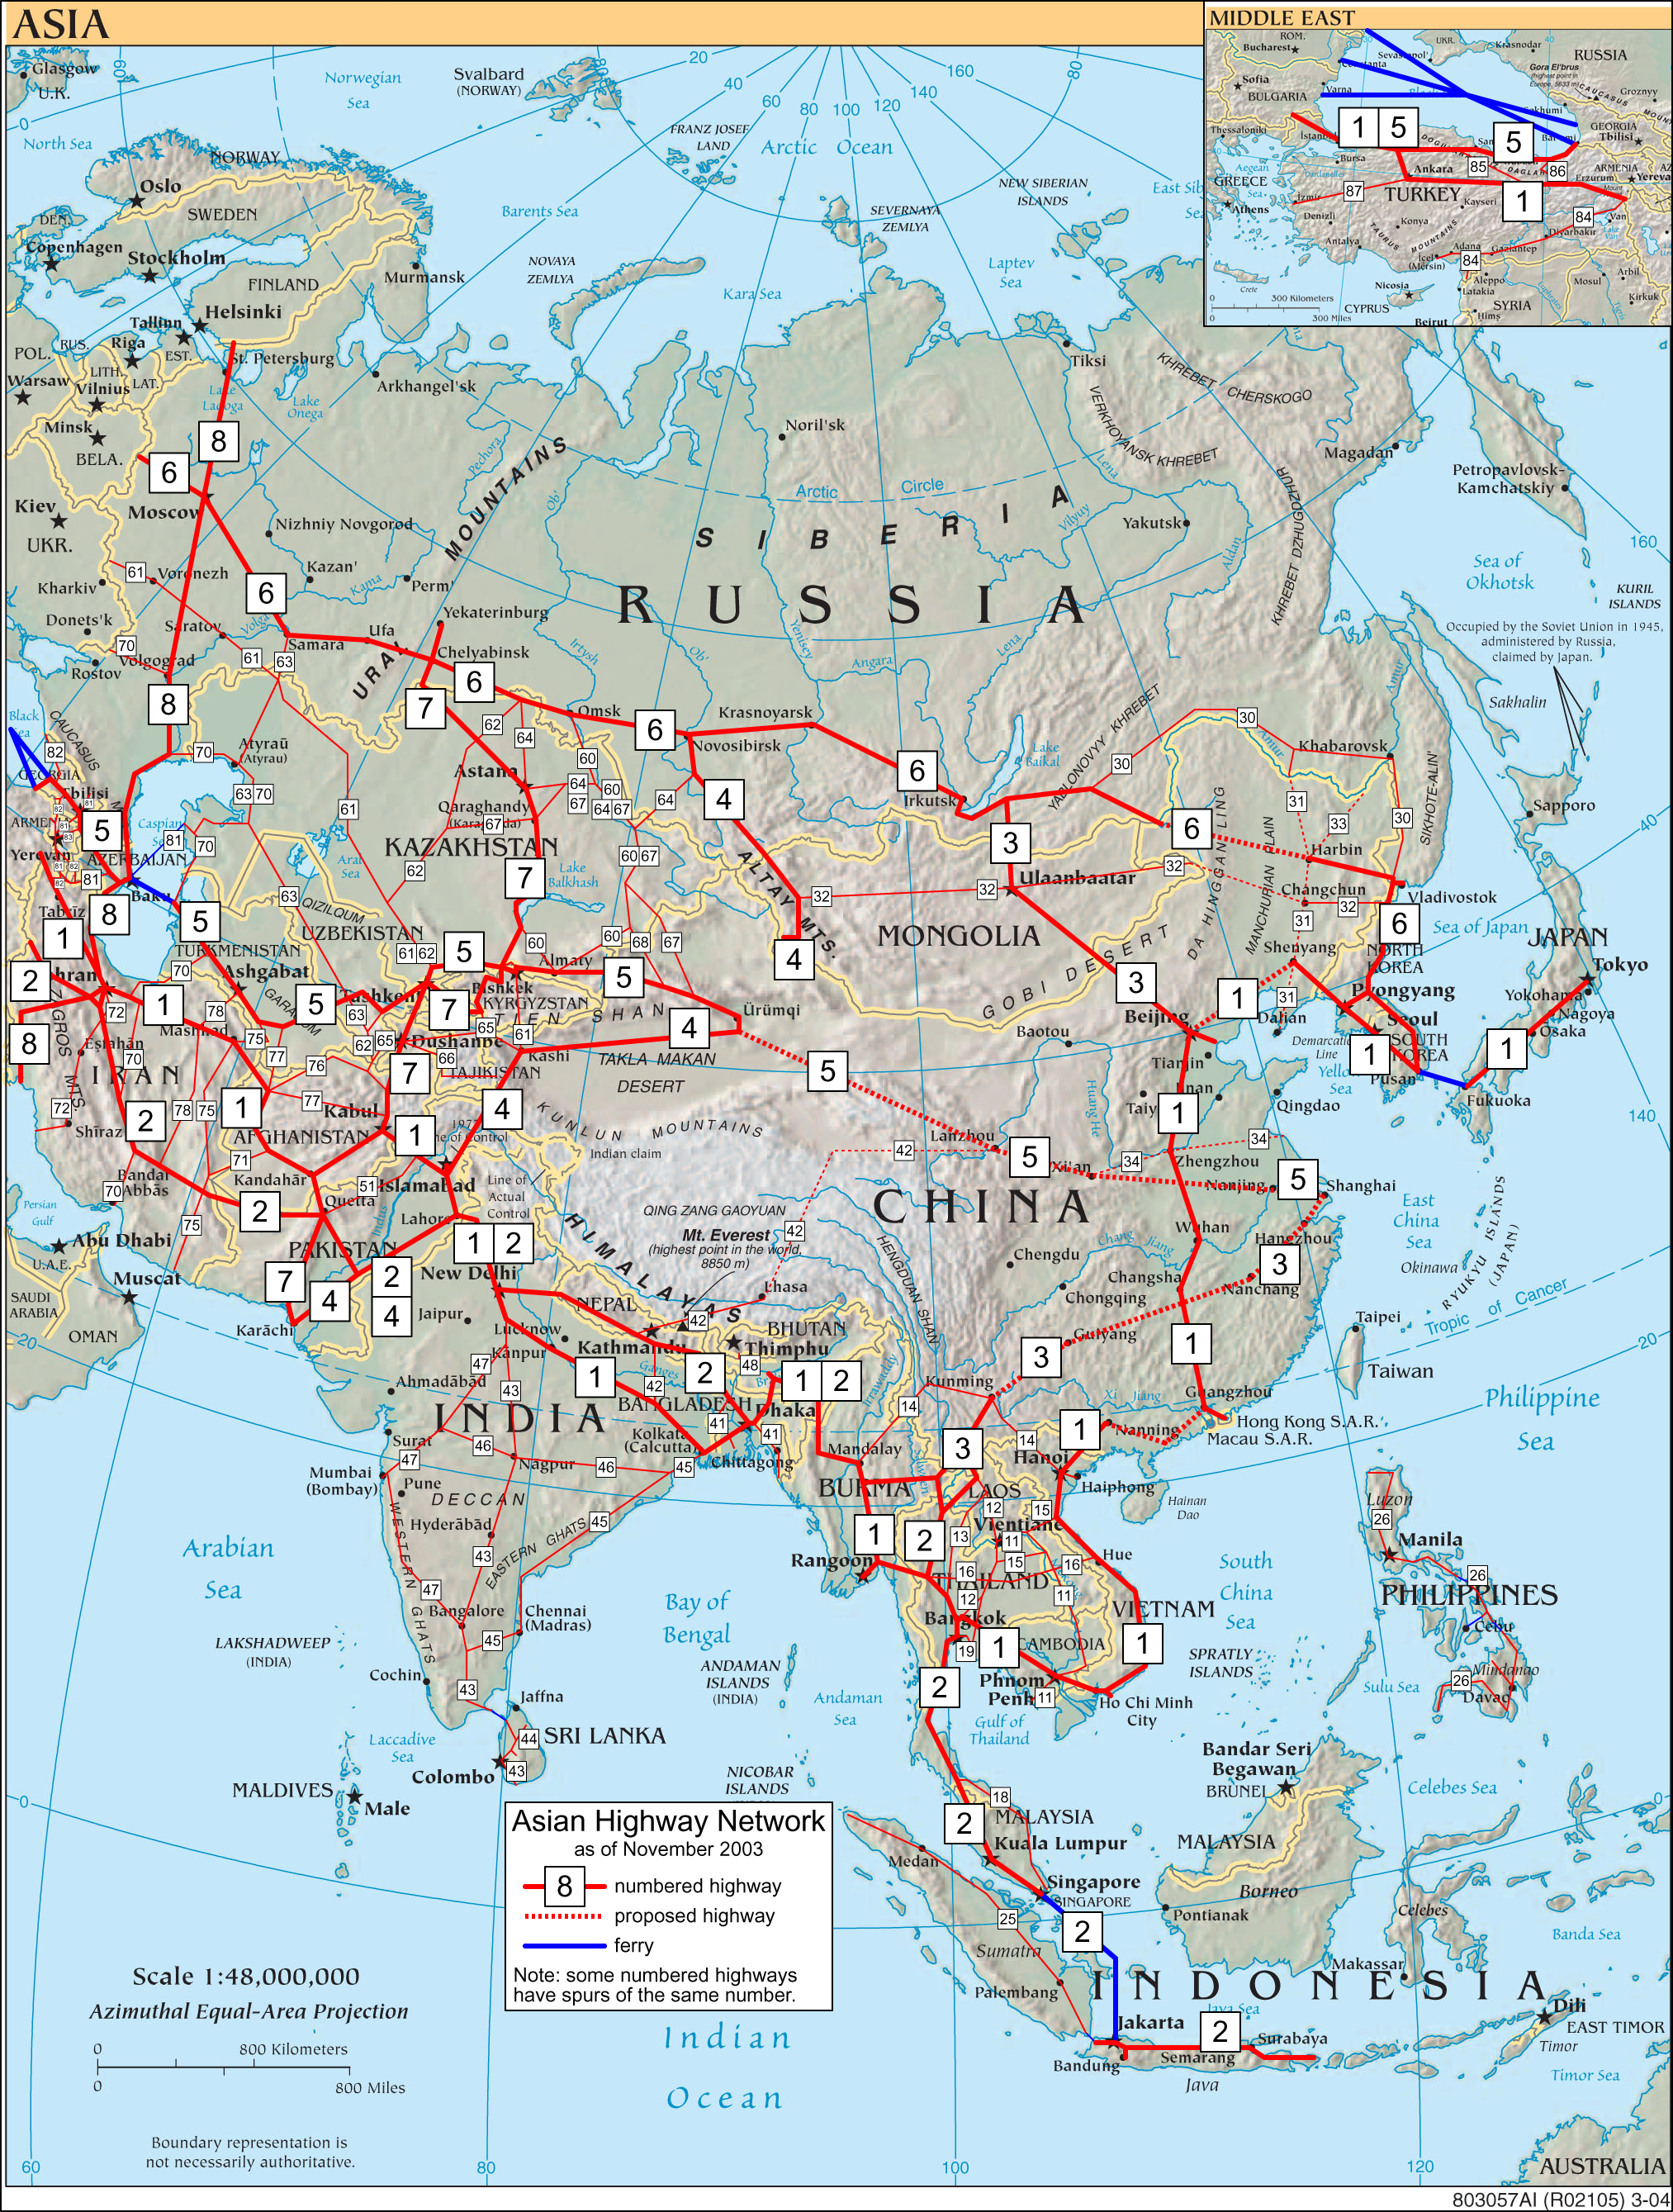 http://upload.wikimedia.org/wikipedia/commons/2/21/Asian_Highways.png